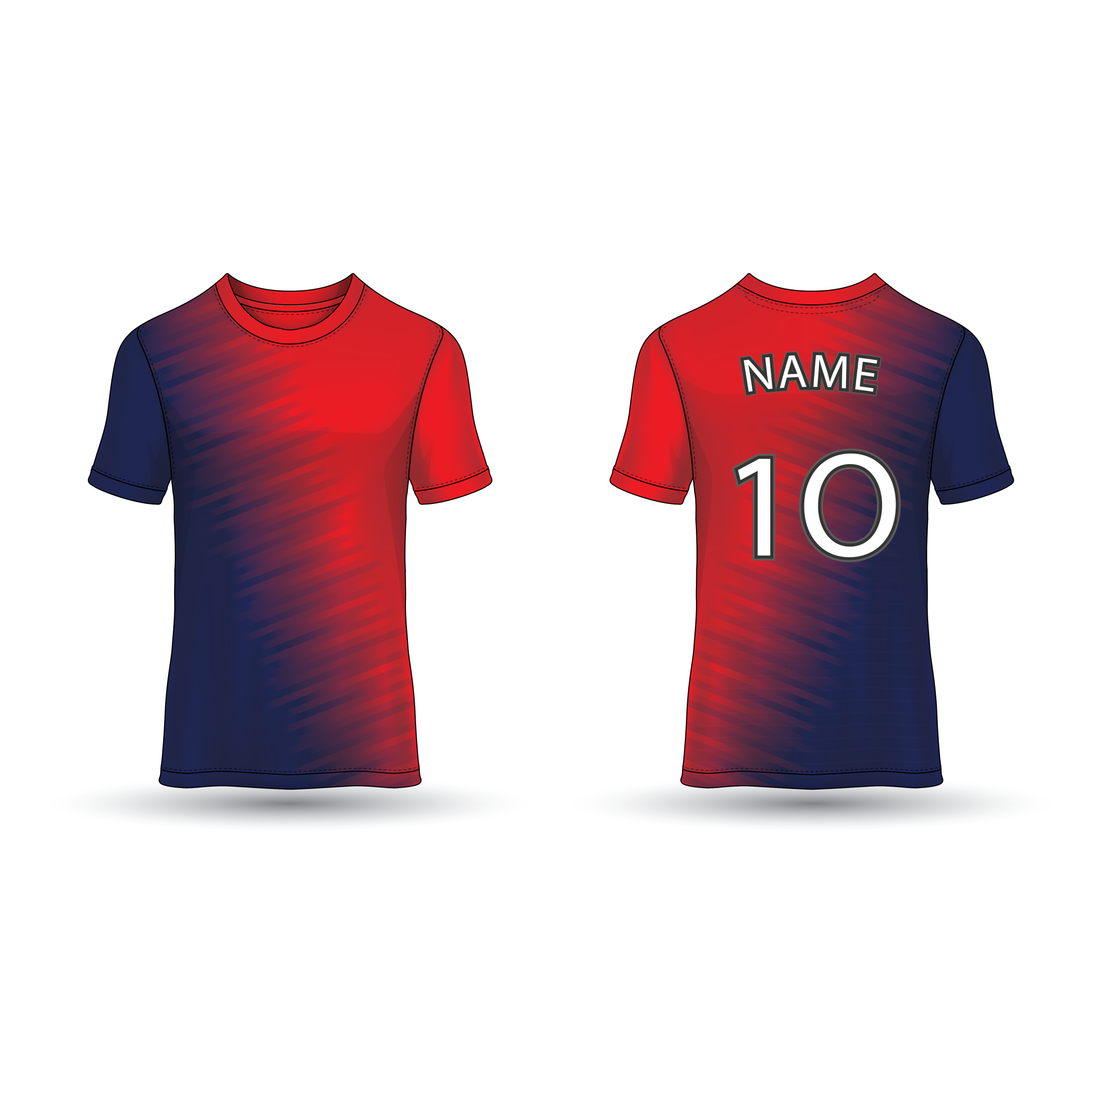 NEXT PRINT All Over Printed Customized Sublimation T-Shirt Unisex Sports Jersey Player Name & Number, Team Name NP50000208